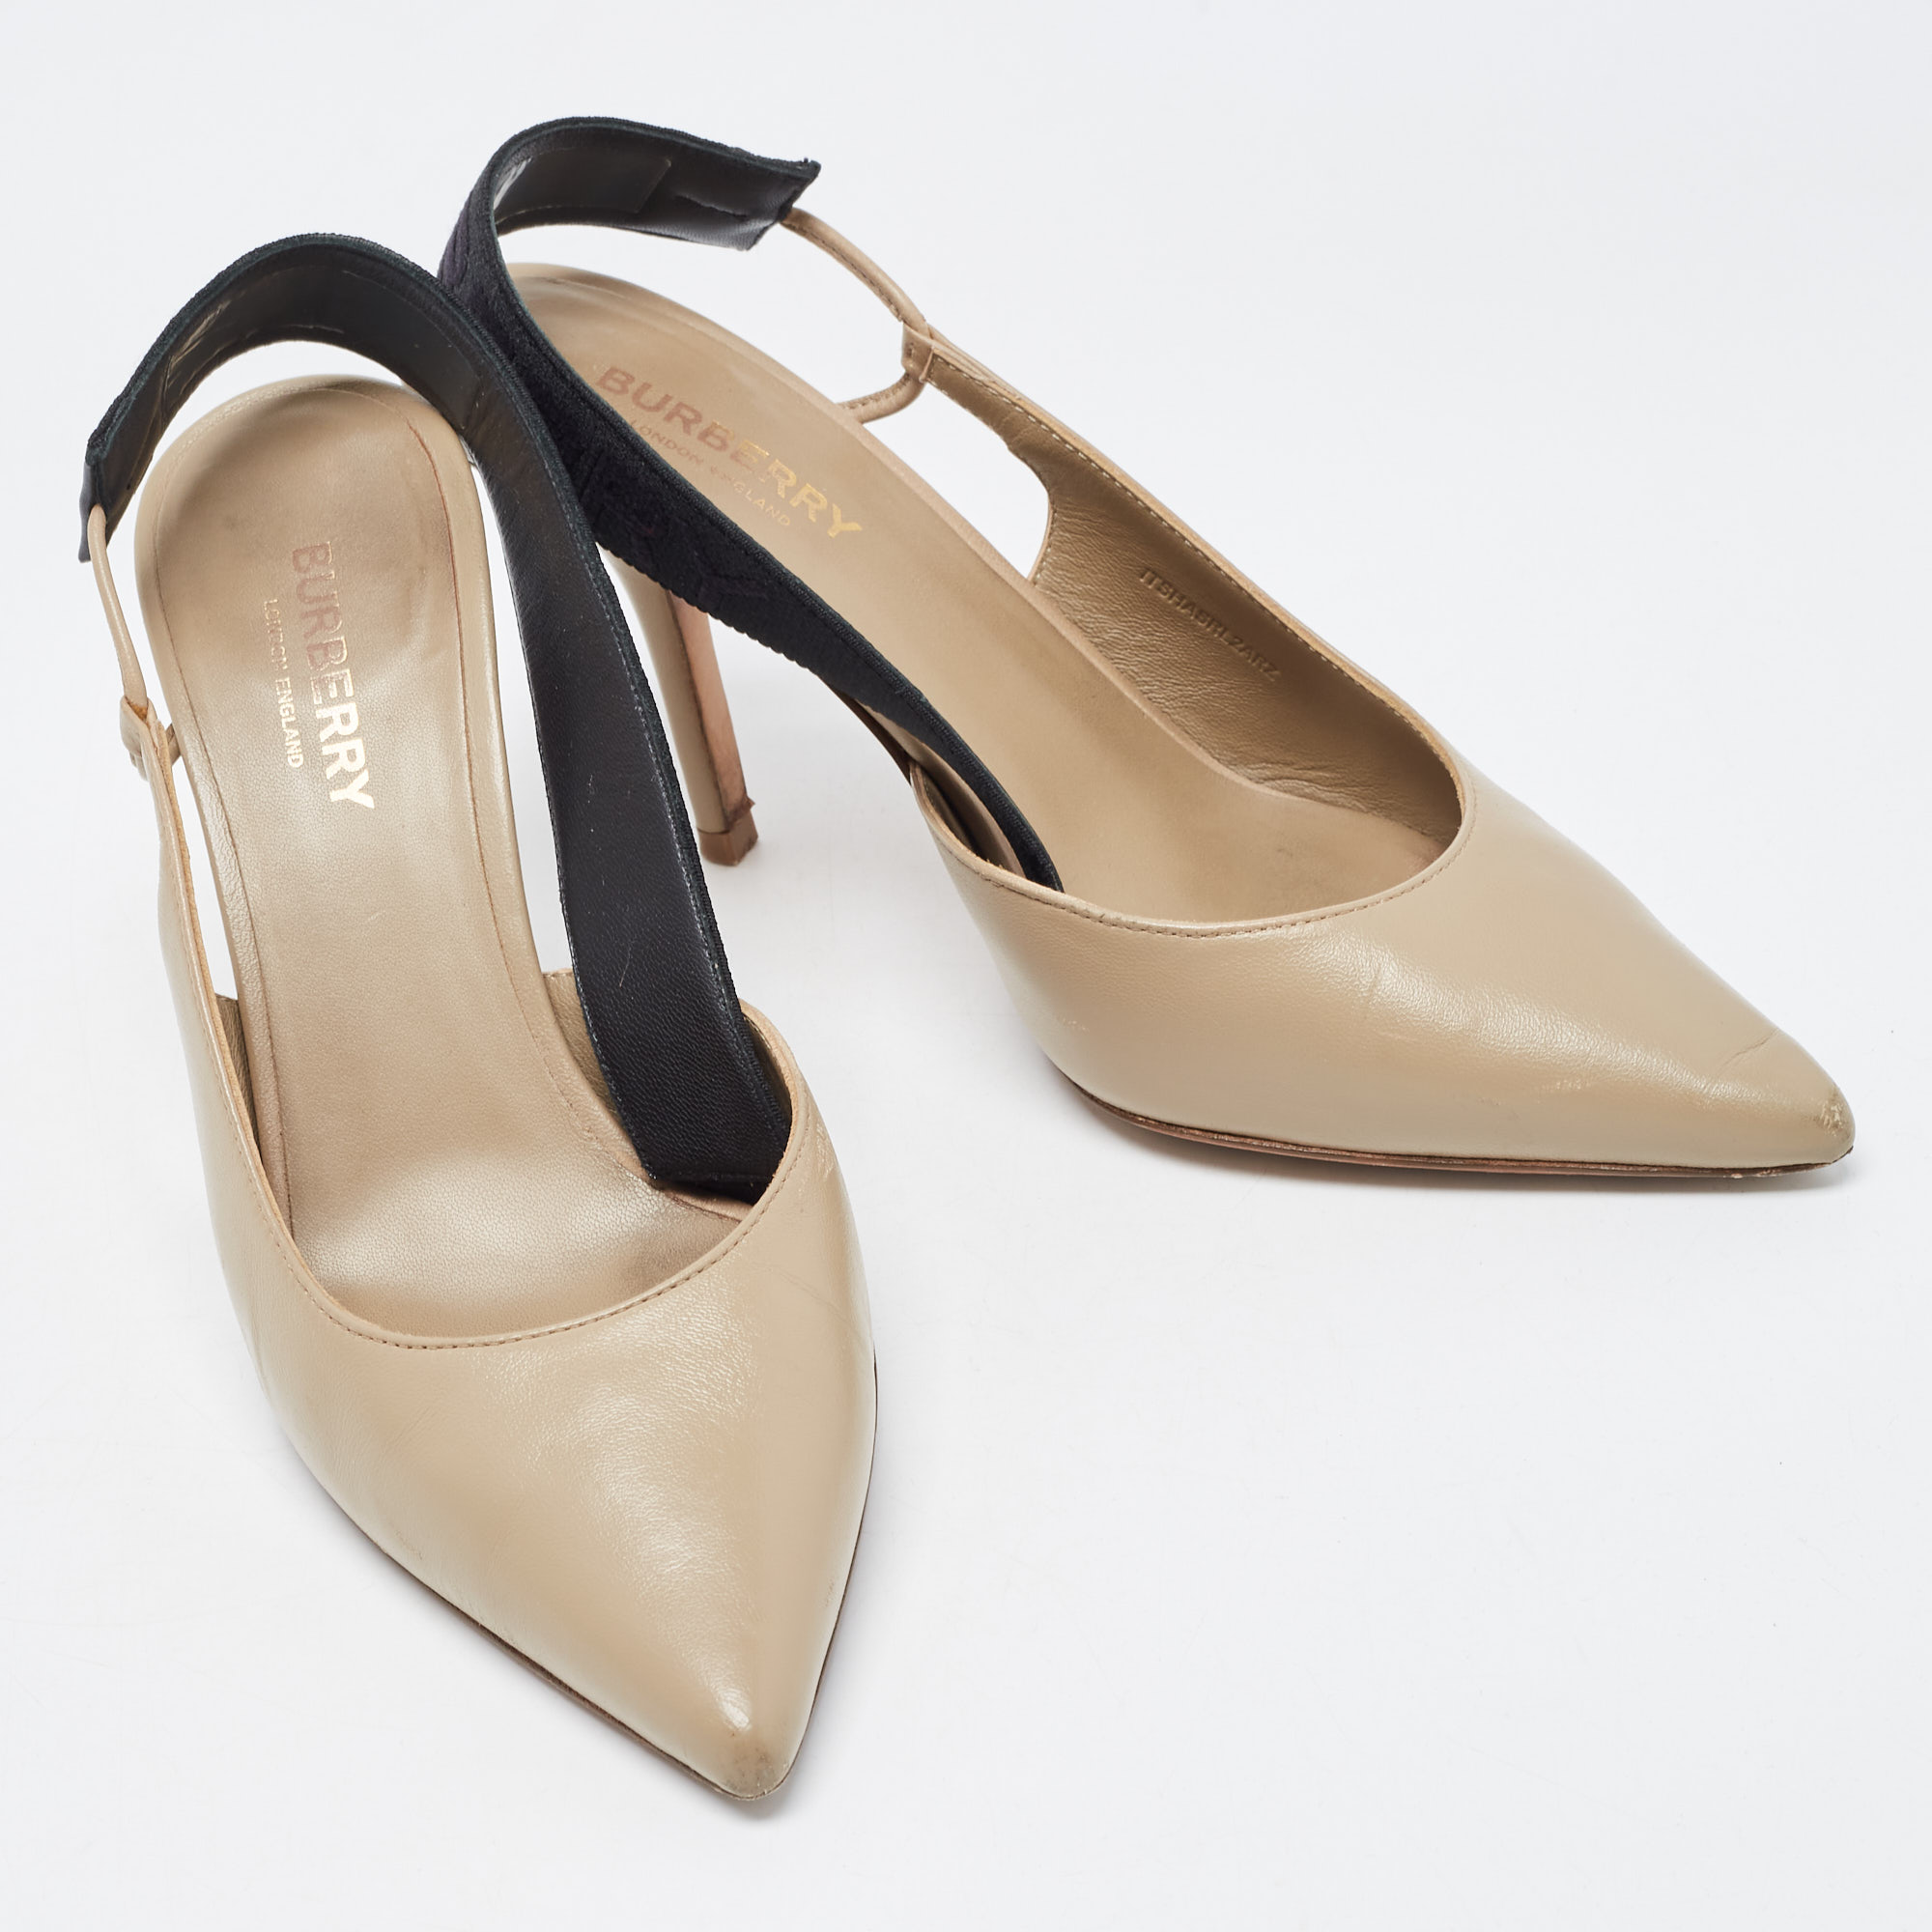 Burberry Brown Leather Slingback Pumps Size 36